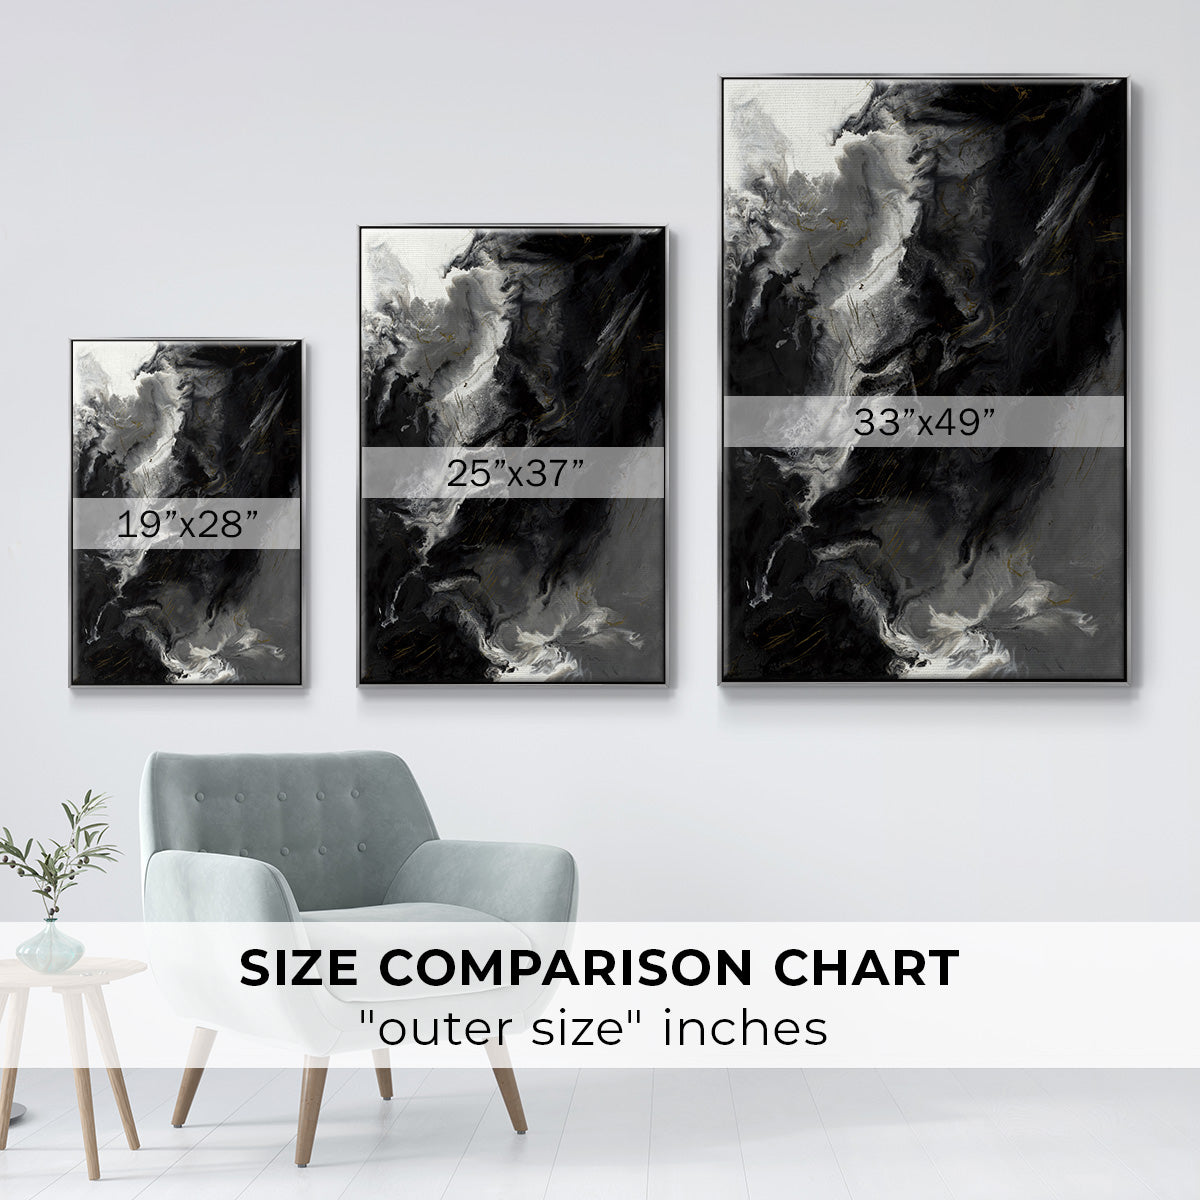 Changes - Framed Premium Gallery Wrapped Canvas L Frame - Ready to Hang